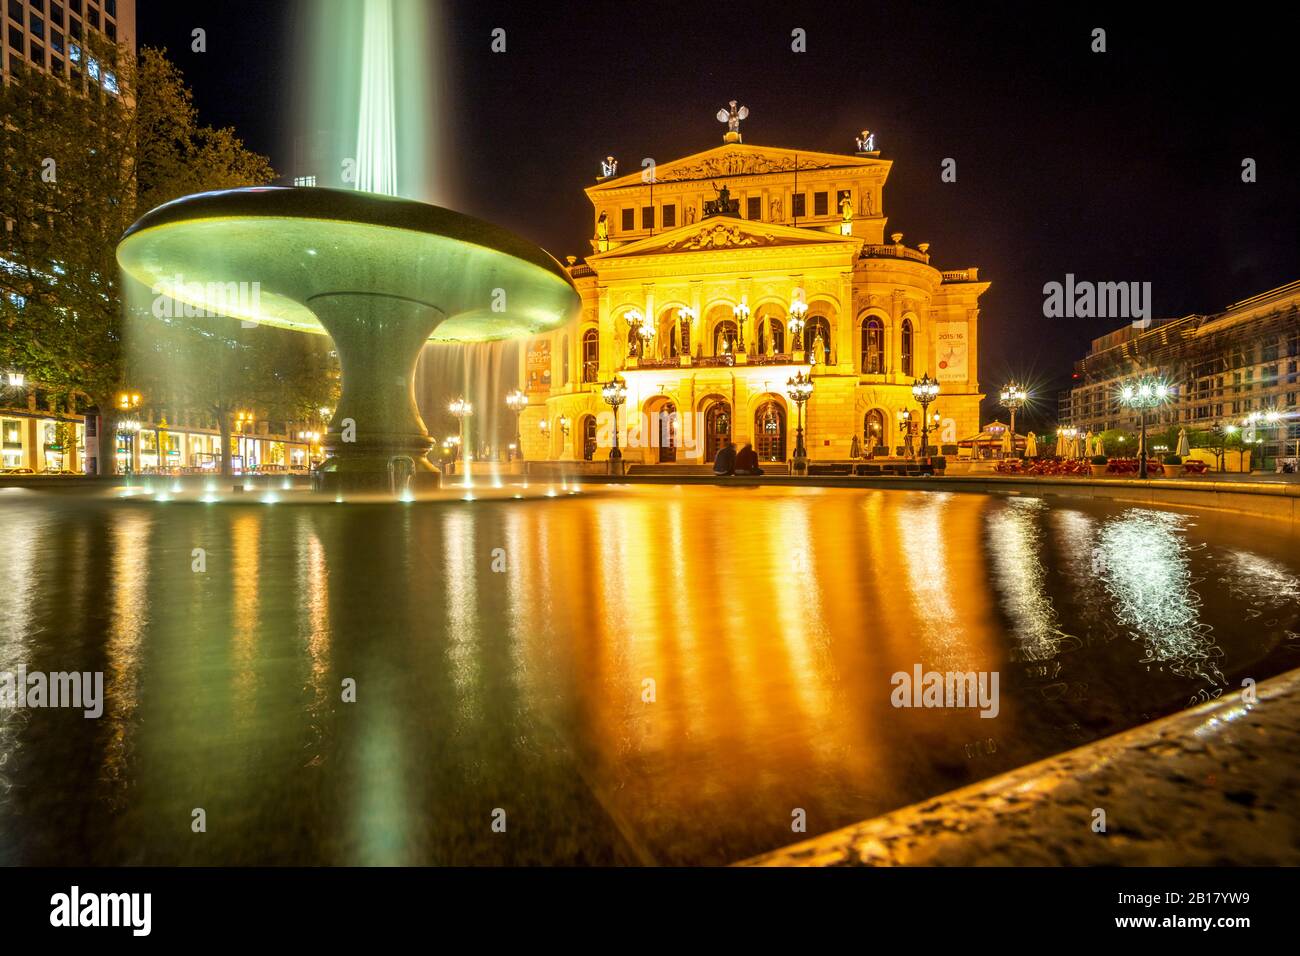 Germany, Hesse, Frankfurt, Fountain in front of Alte Oper at night Stock Photo